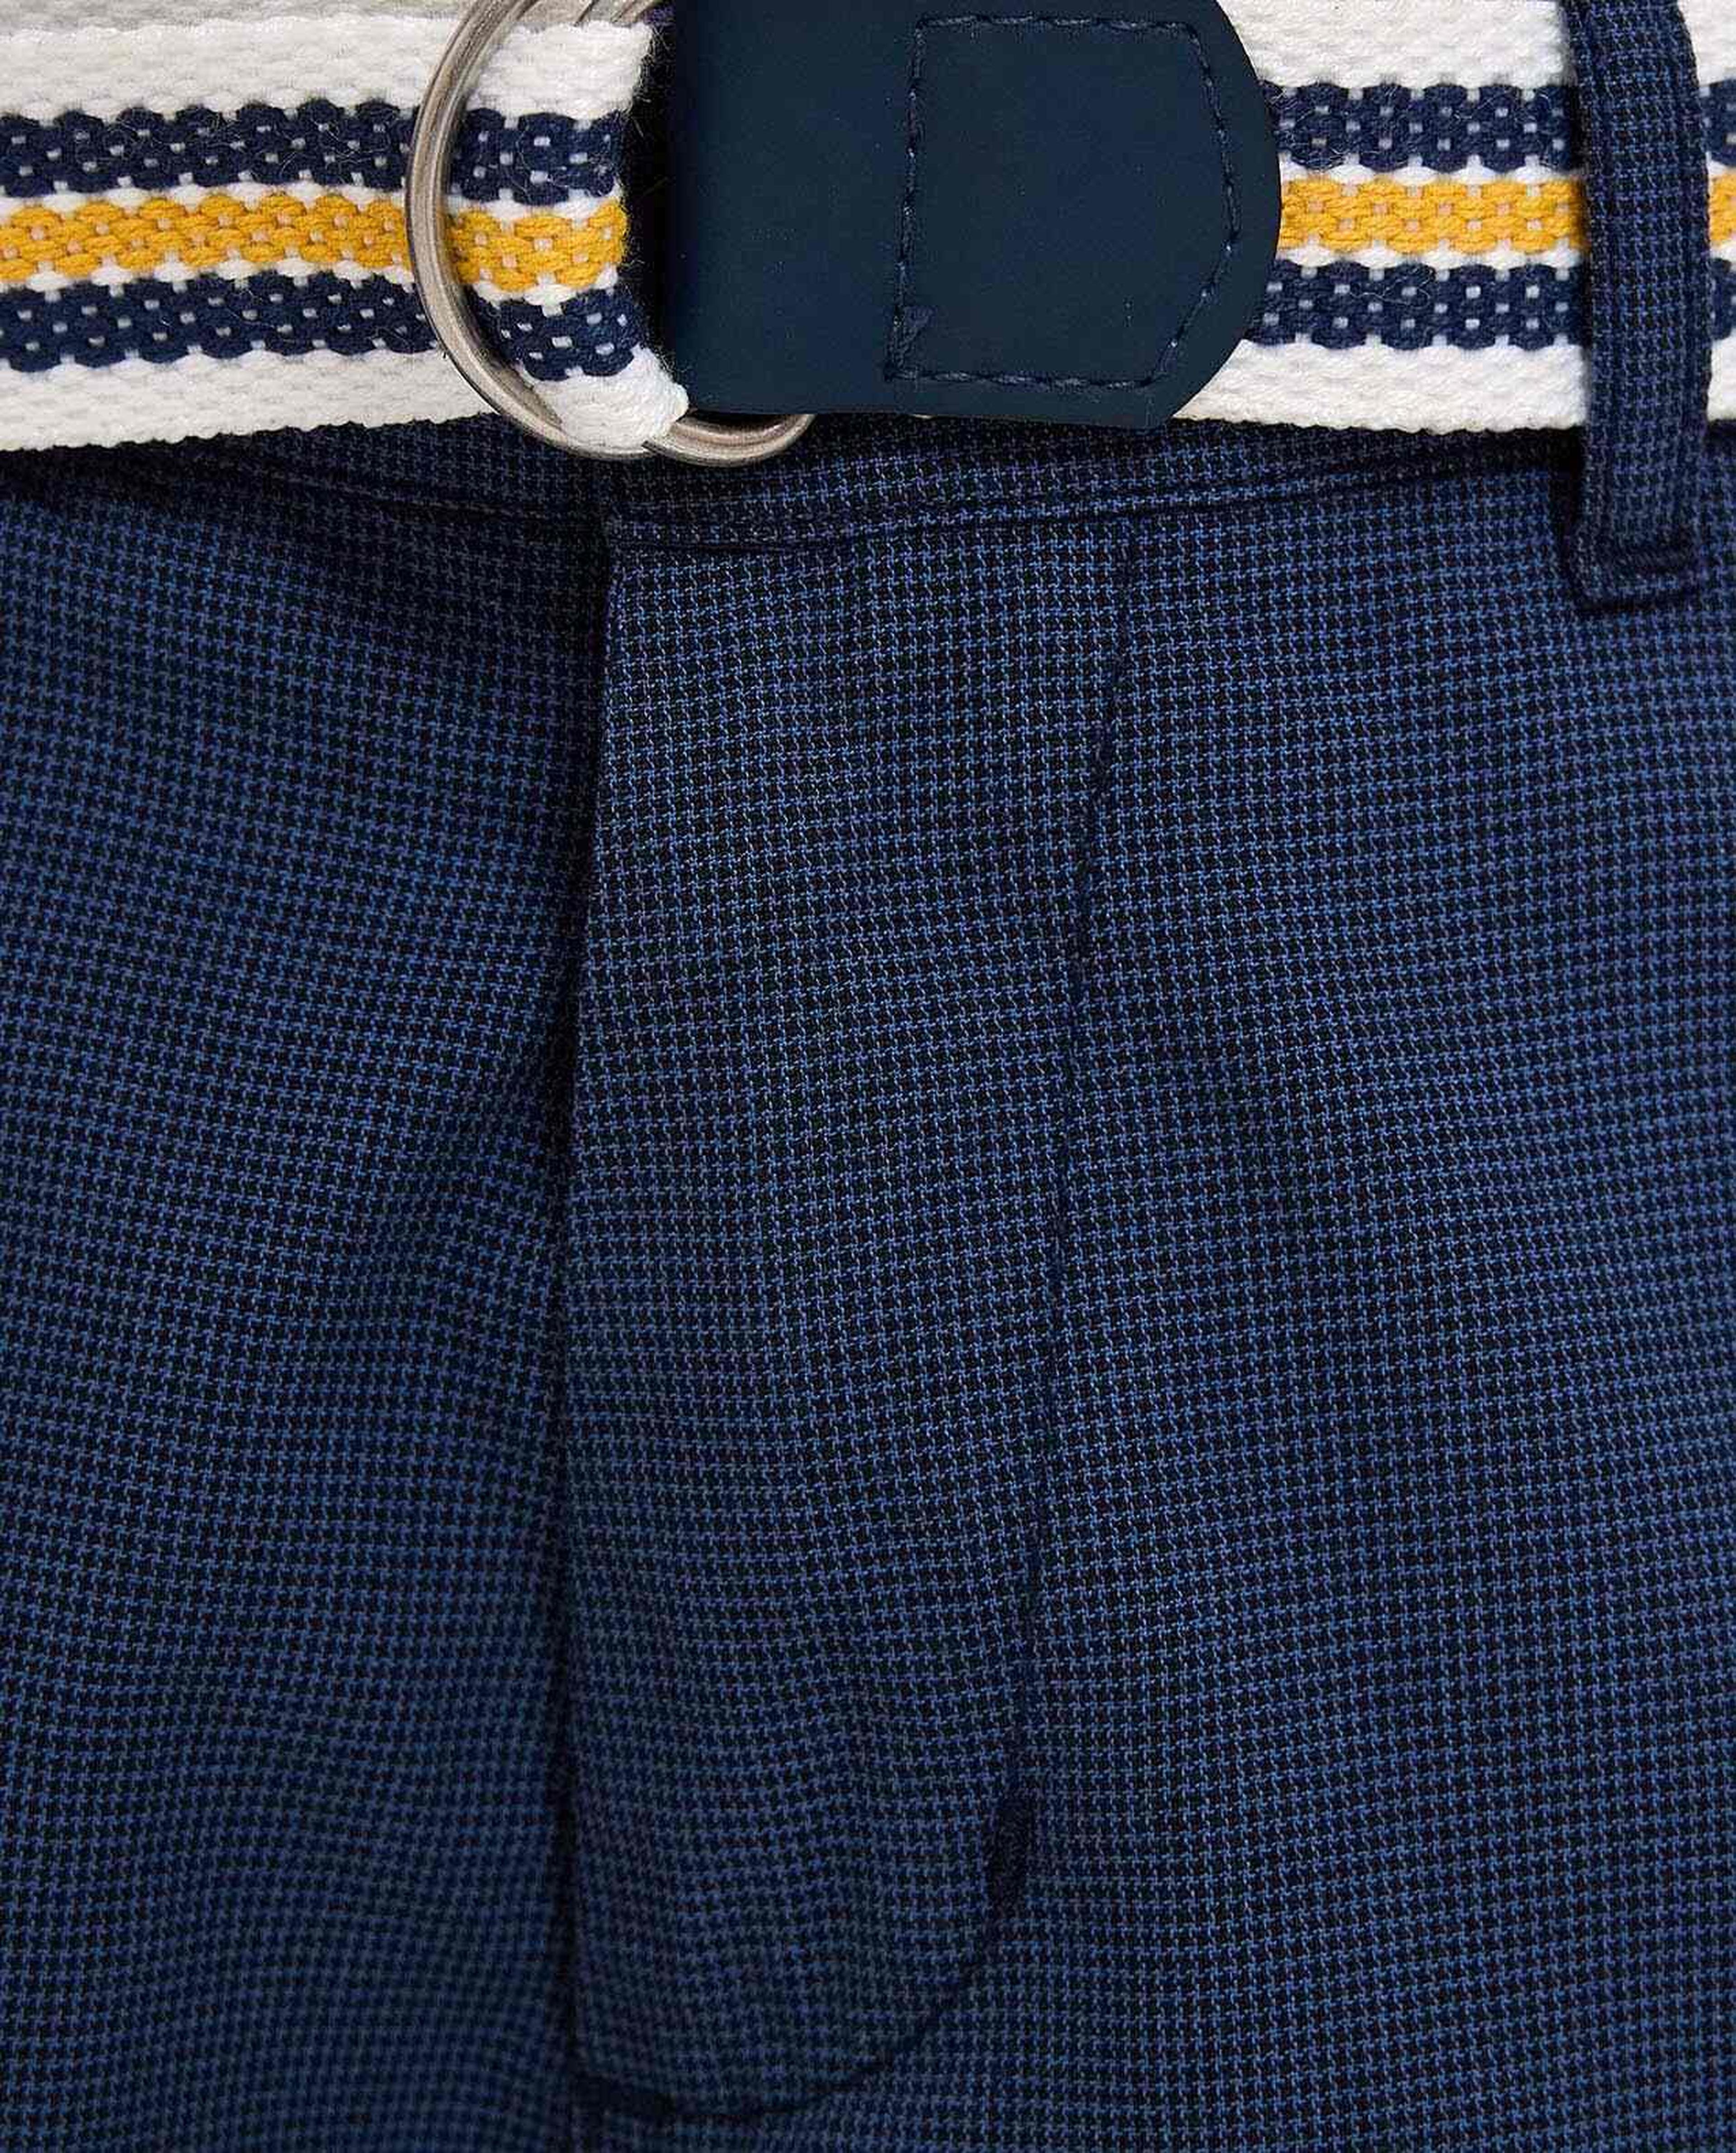 Patterned Shorts with Button Closure